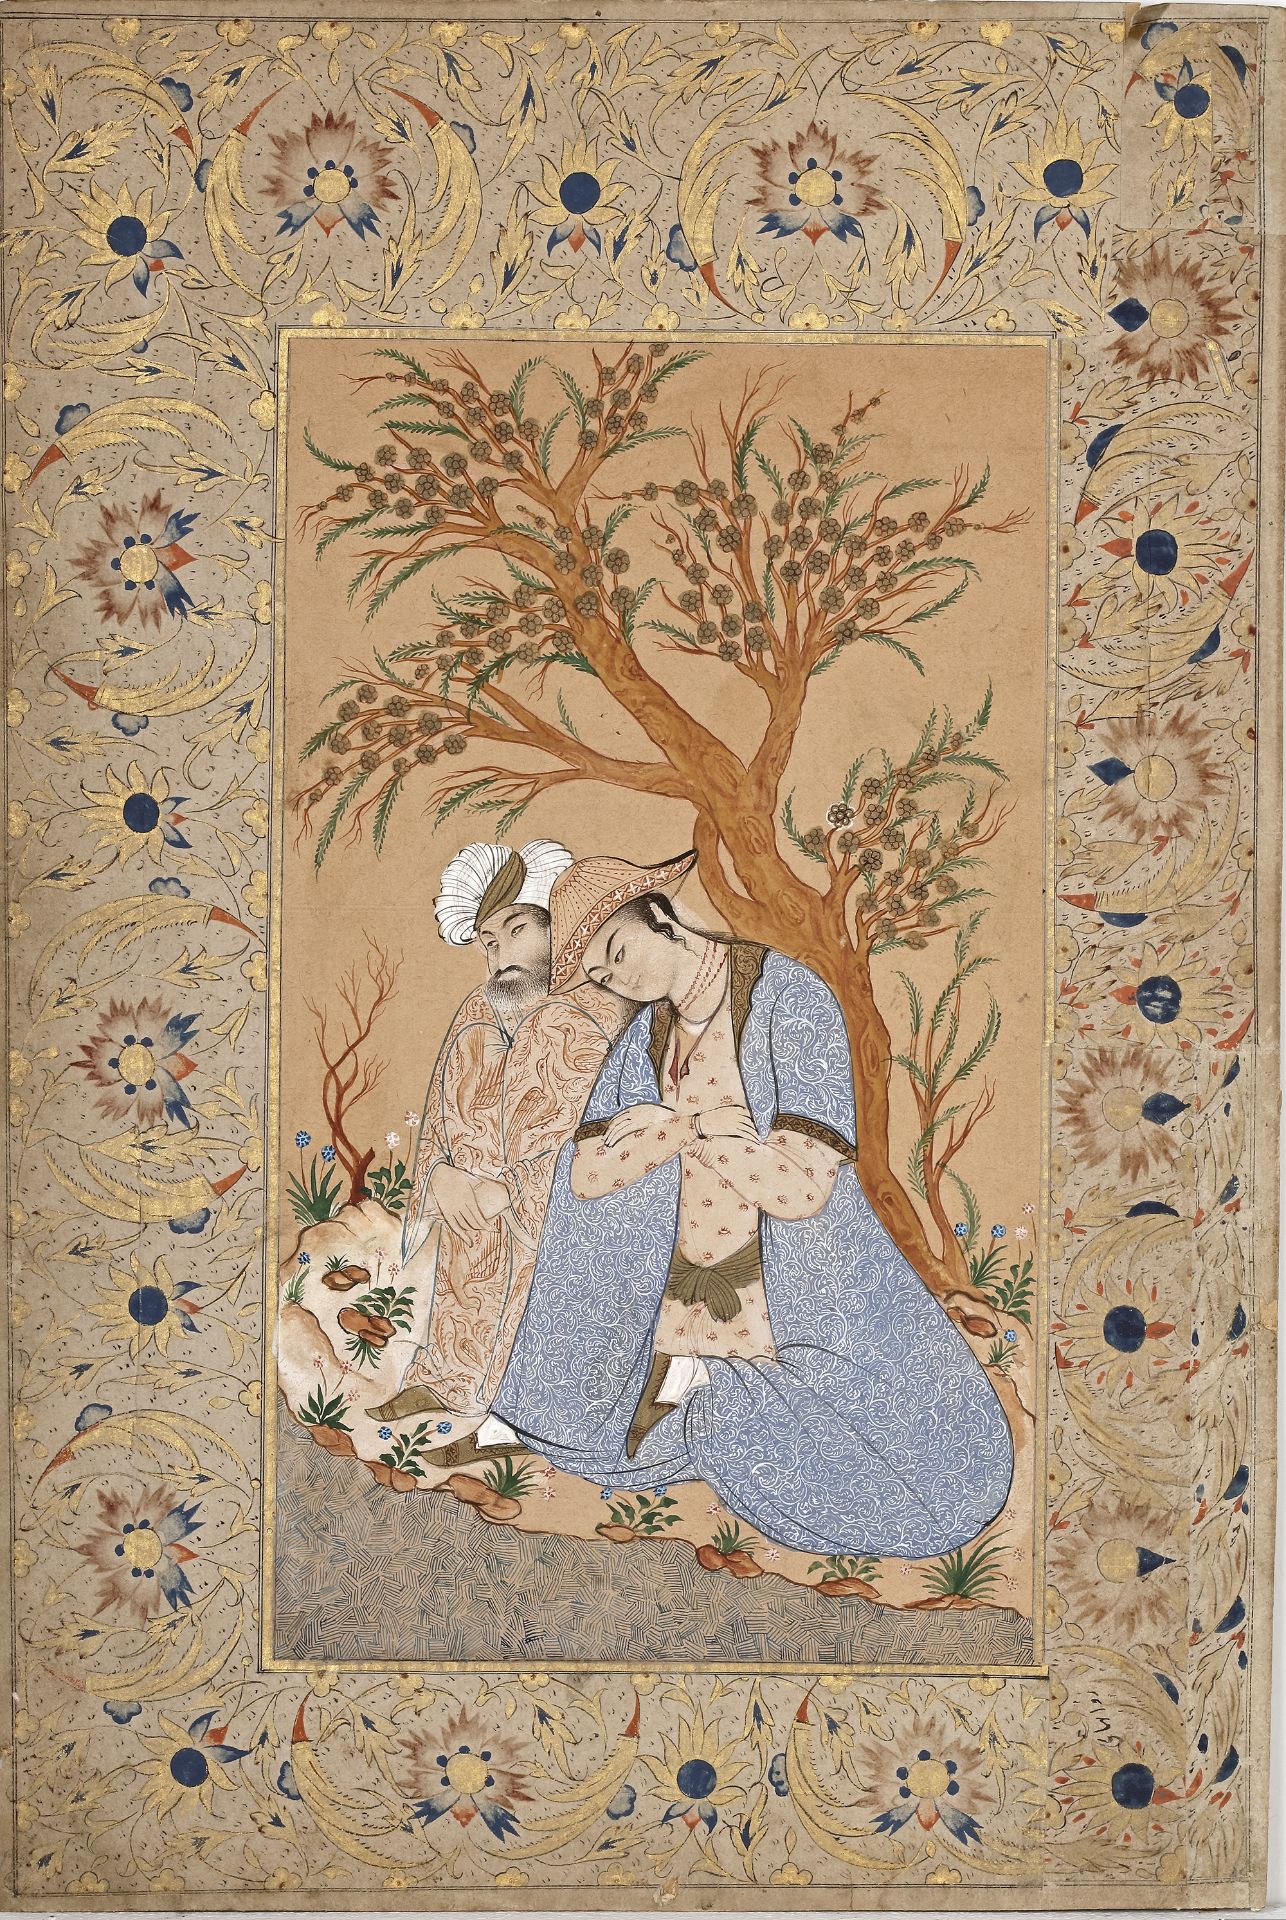 A SAFAVID STYLE MINIATURE PAINTING, PERSIA, 20TH CENTURY - Image 2 of 2